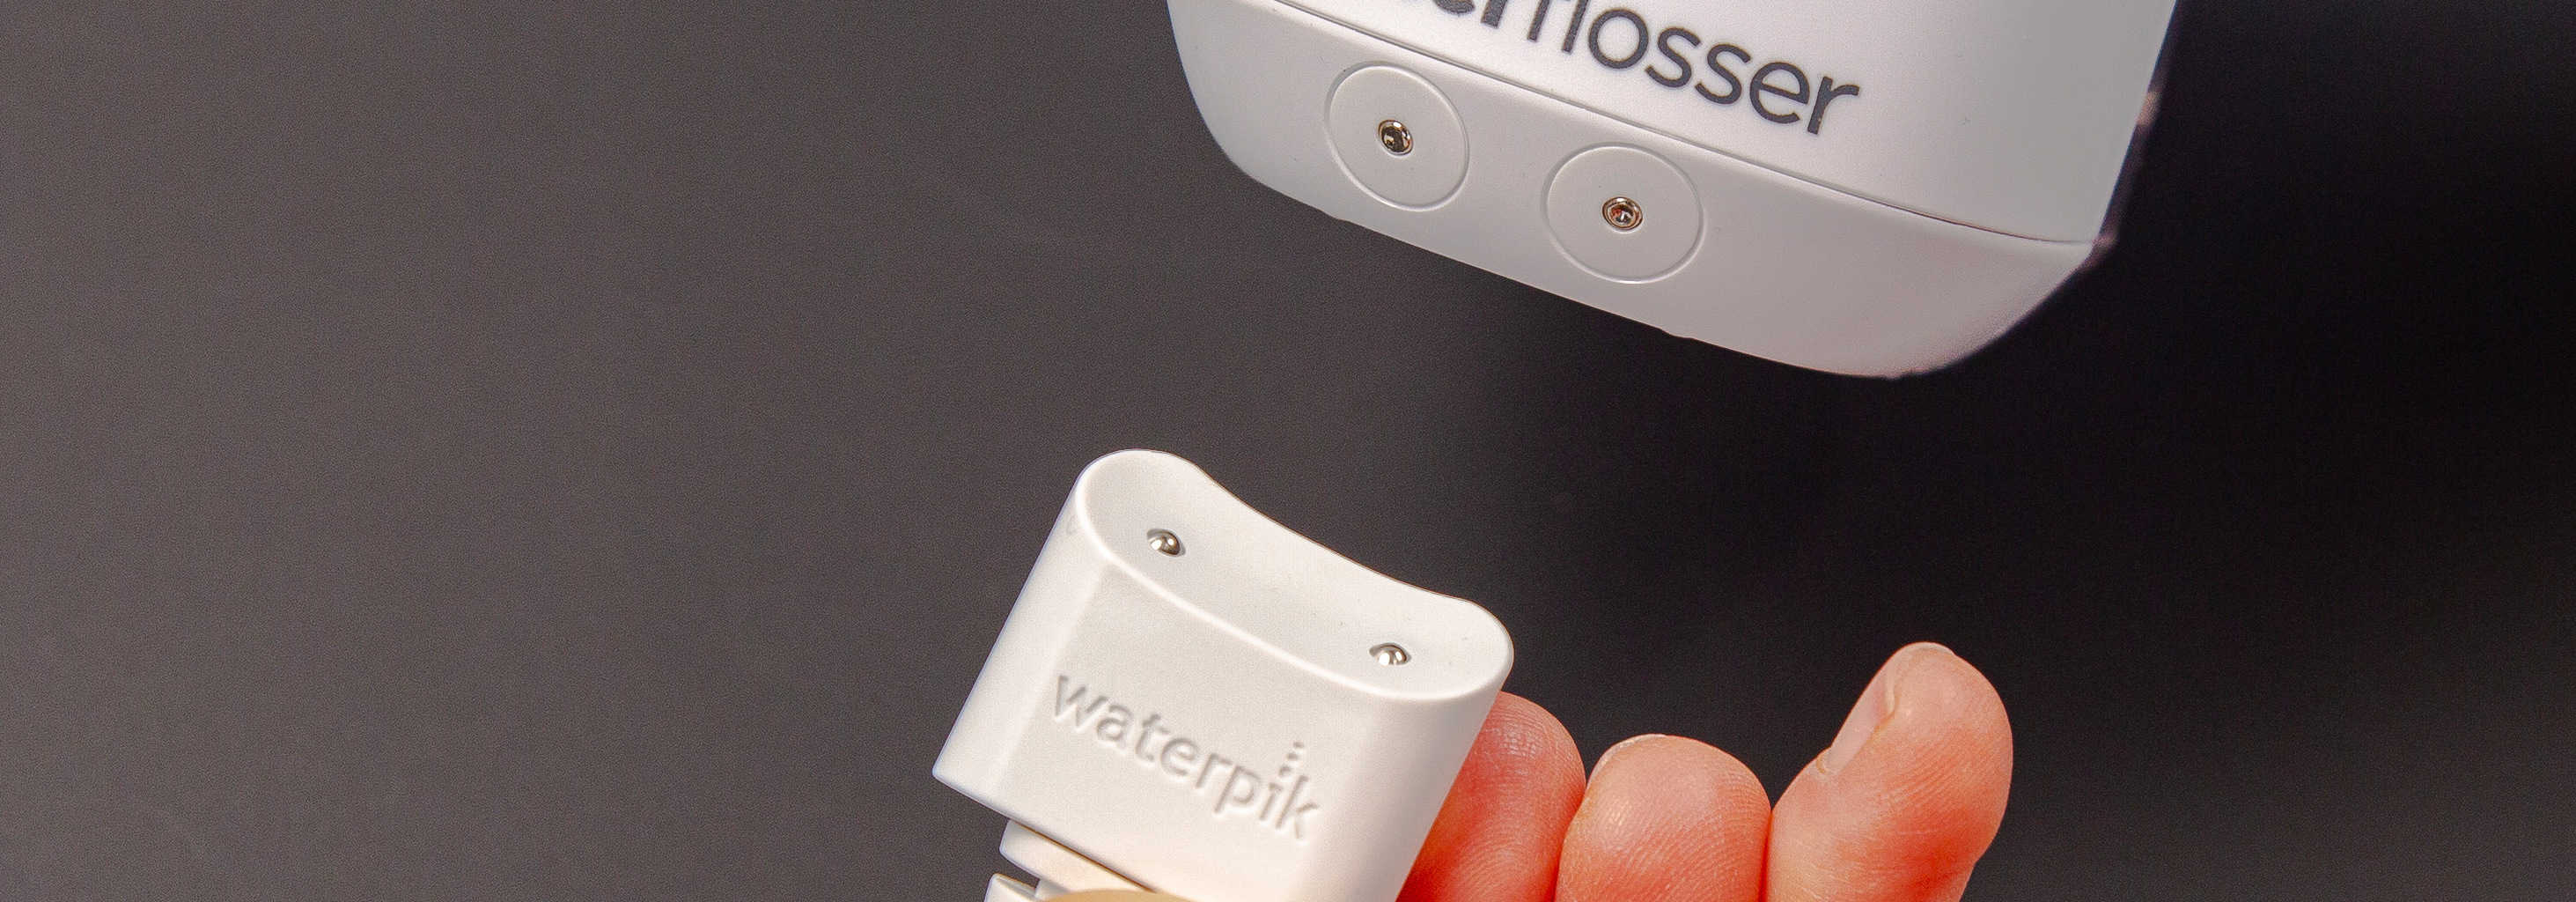 Magnetic charging cable - Waterpik Cordless Select